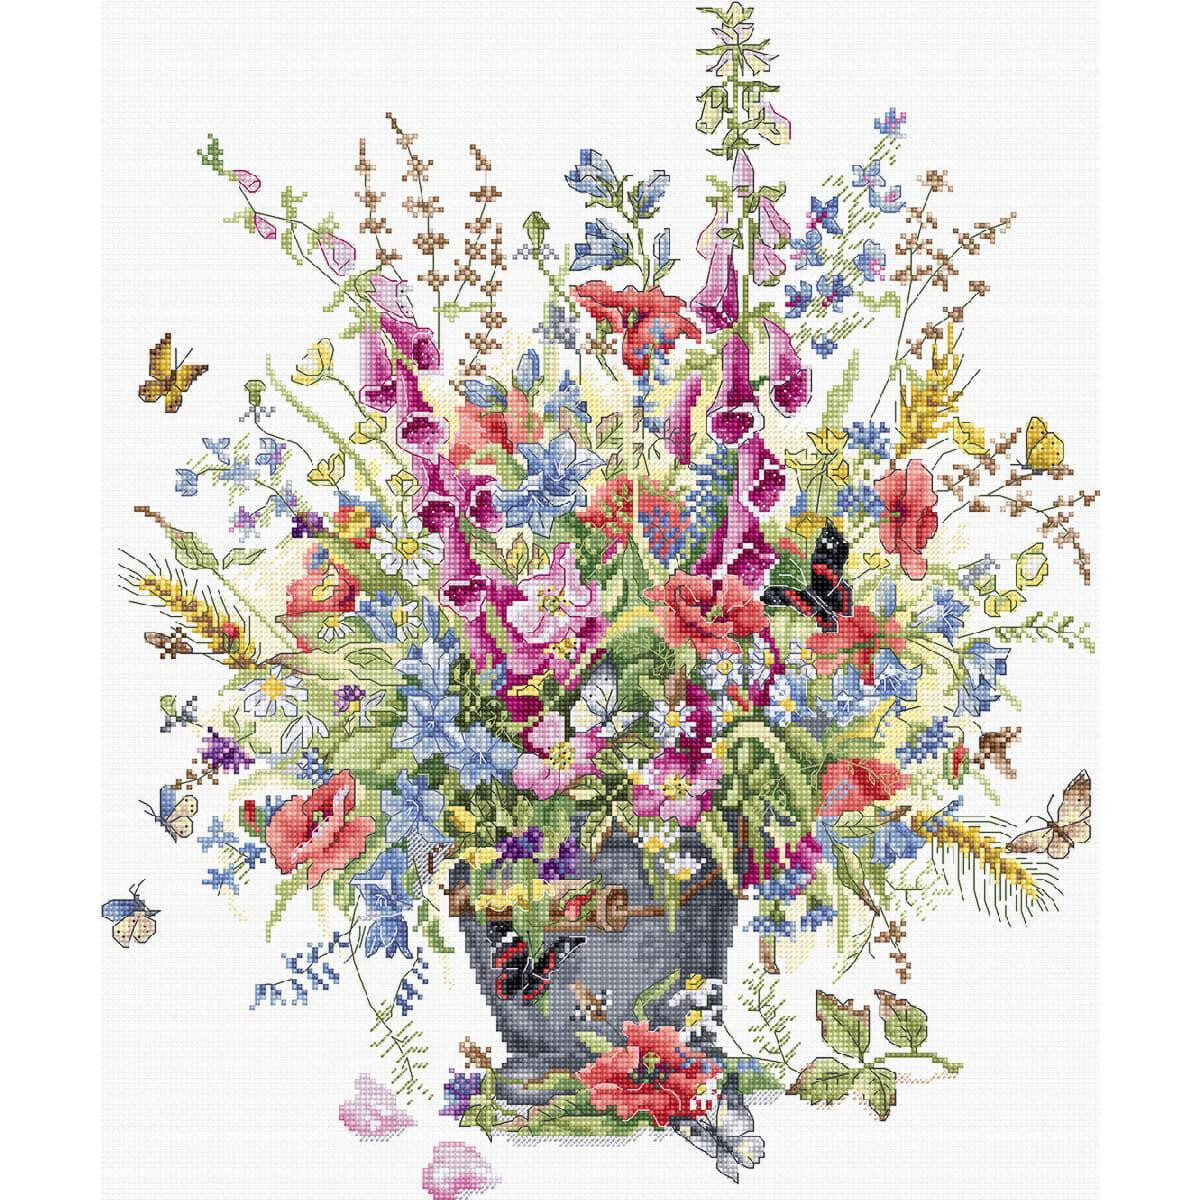 A lively cross-stitch pattern shows a colorful bouquet of...